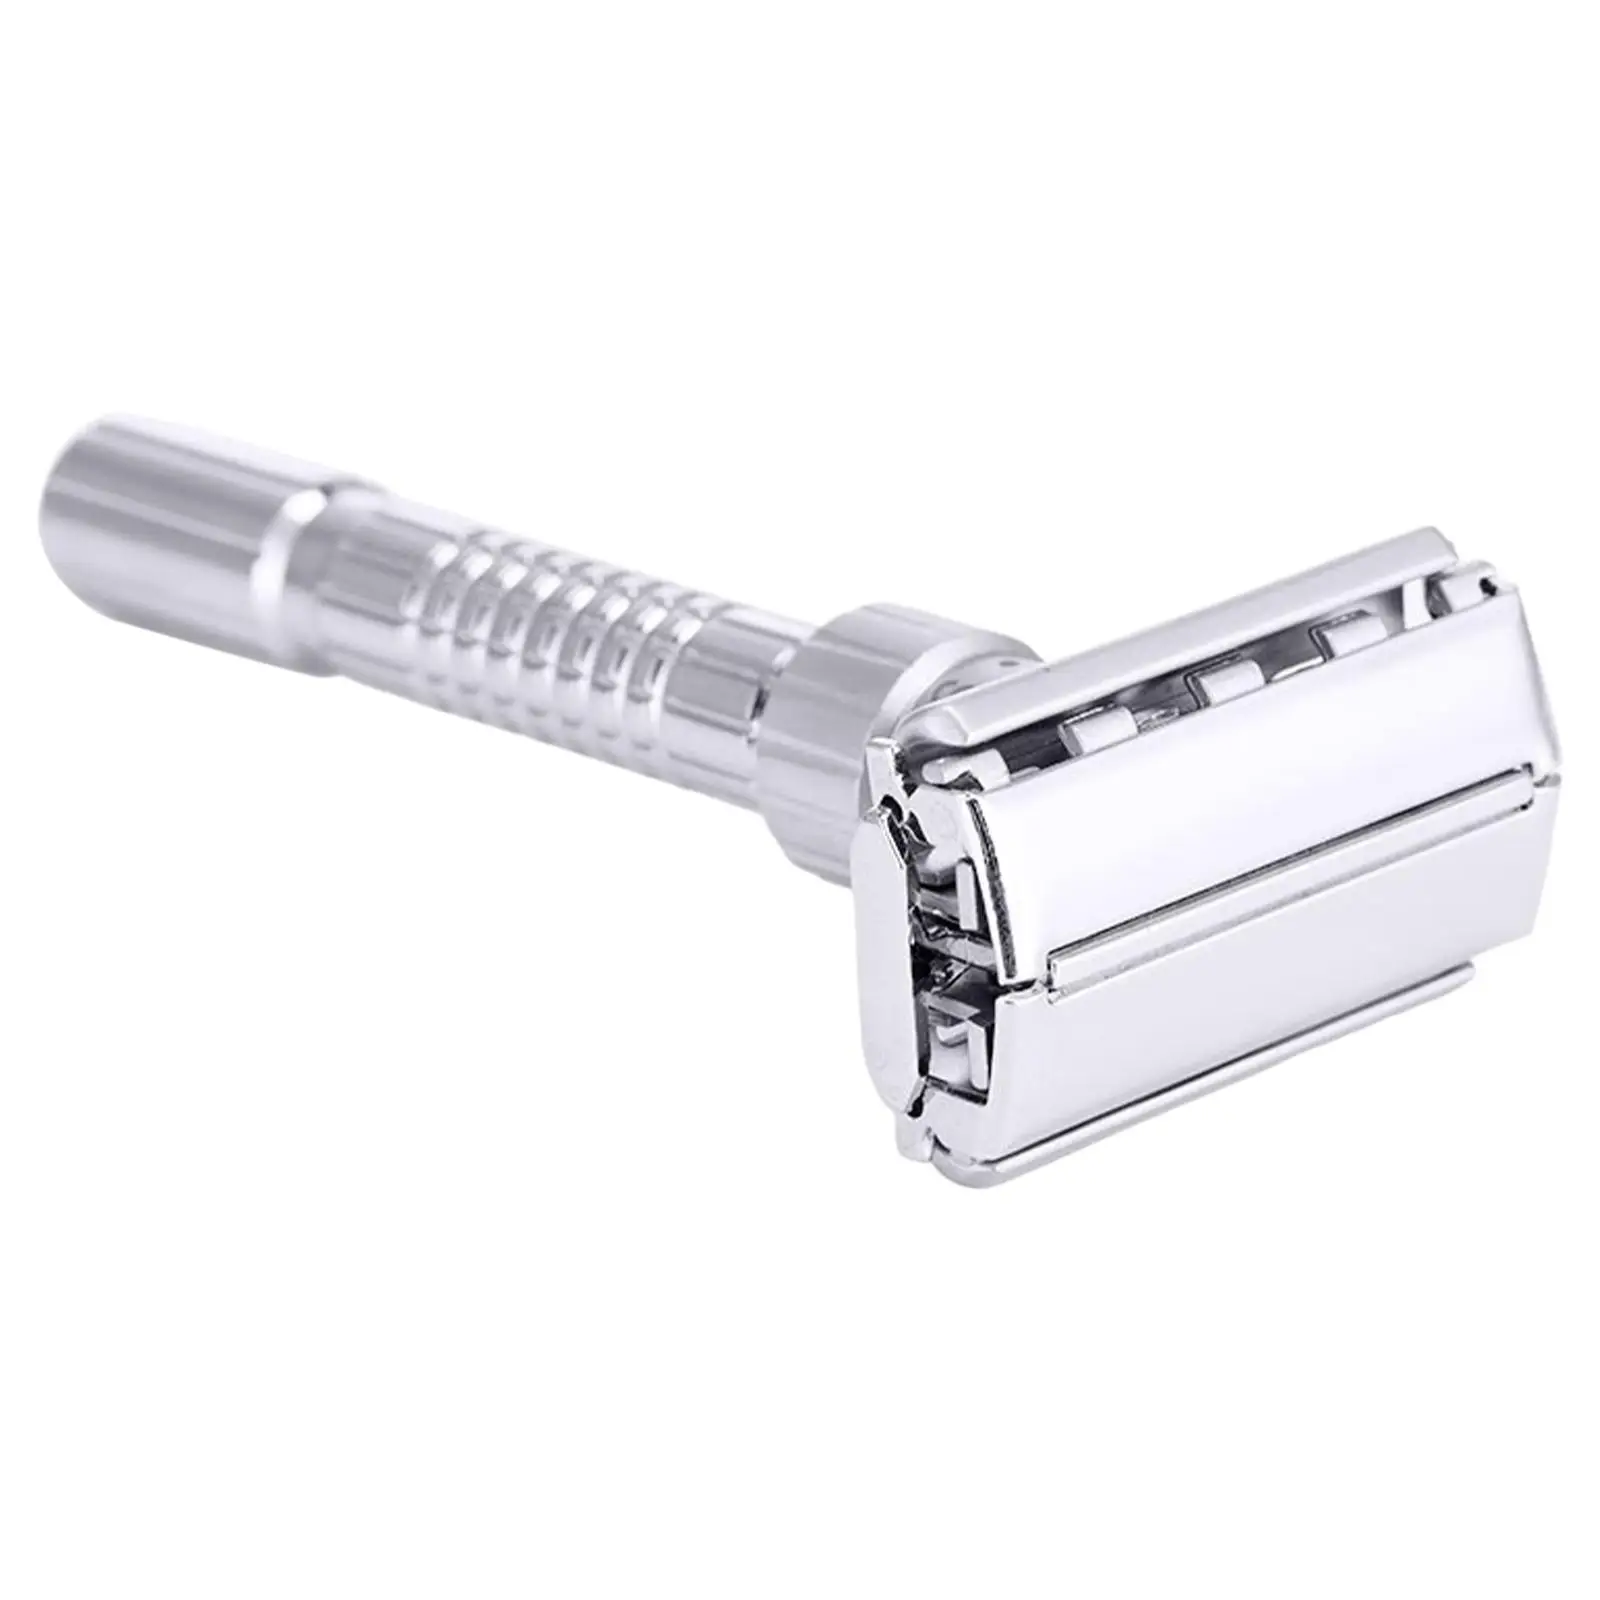 Manual Safety with 5 Zinc Alloy Reusable Shaver, Safety Shaving Everyday Use, Travel Men